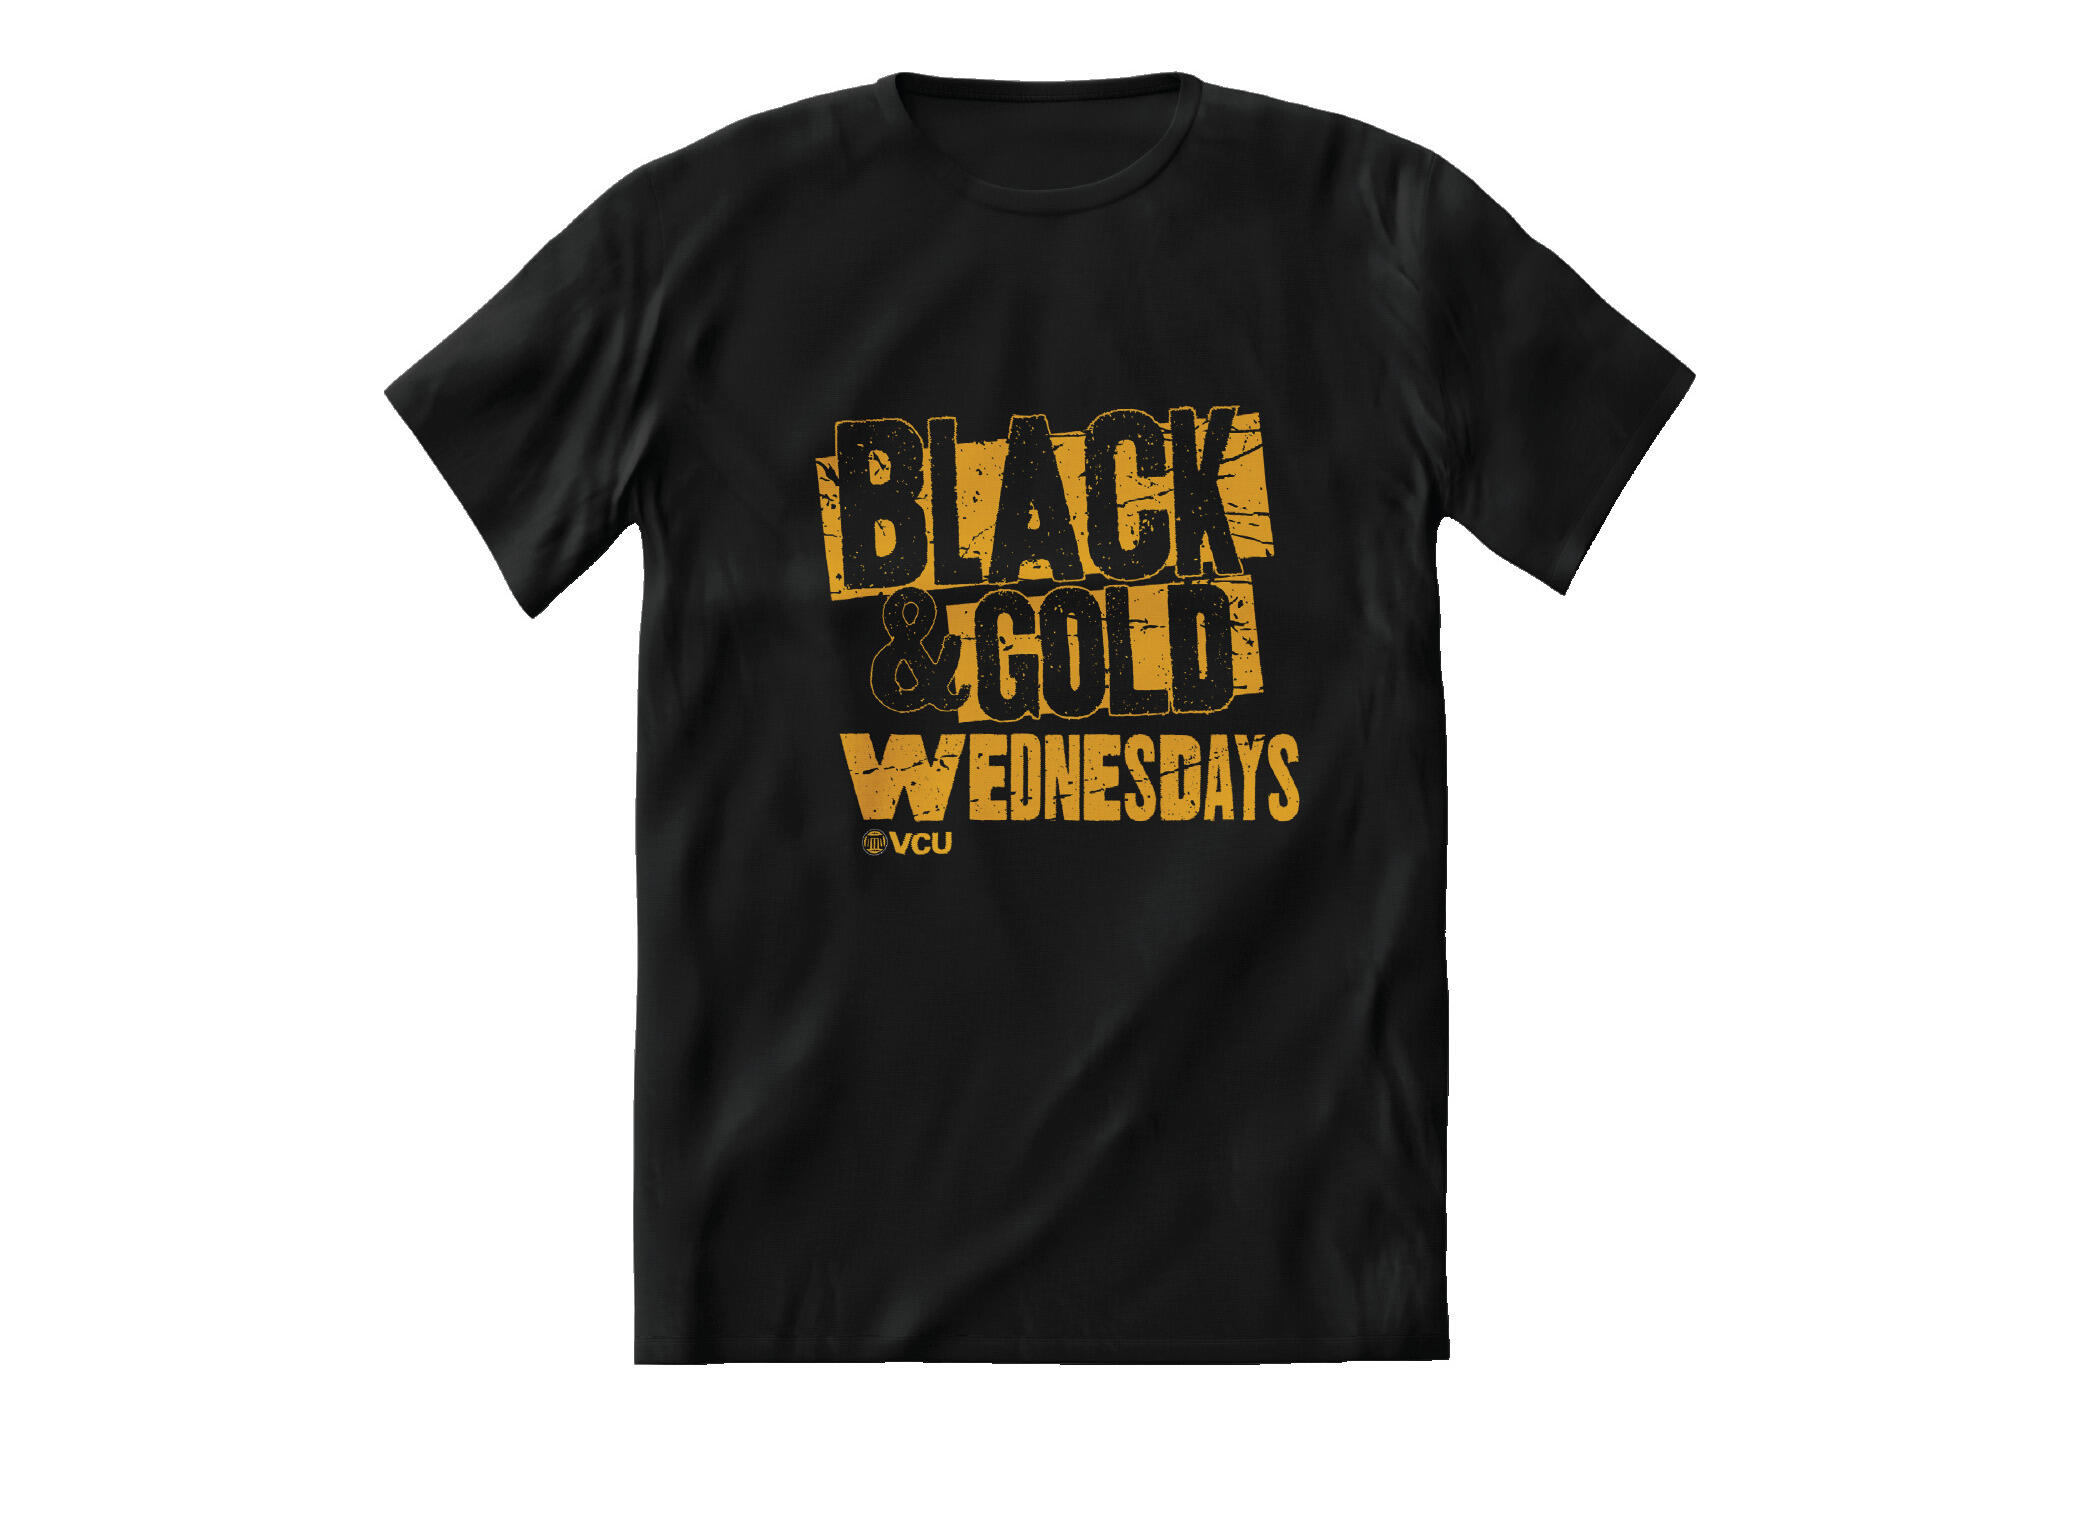 A black t-shirt with black text with yellow outlines and yellow text that reads \"BLACK & GOLD WEDNESDAYS VCU\"